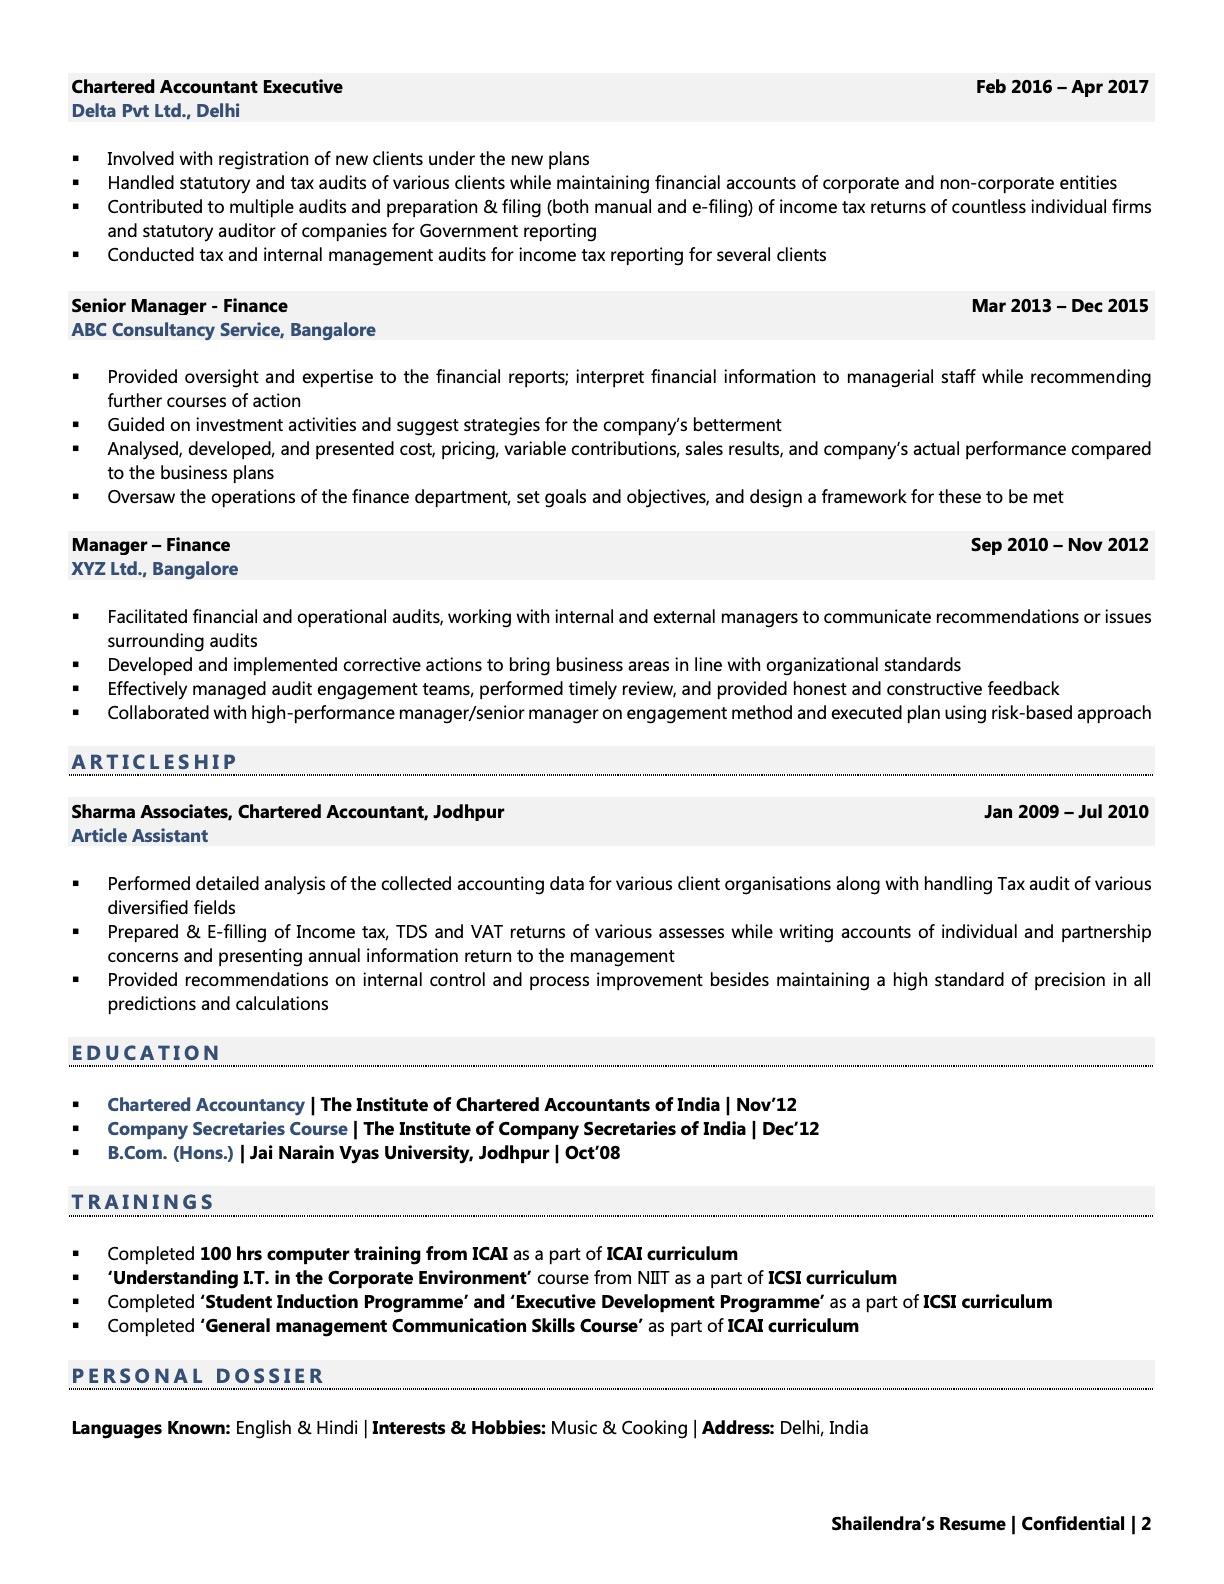 Chartered Accountant (CA) - Resume Example & Template